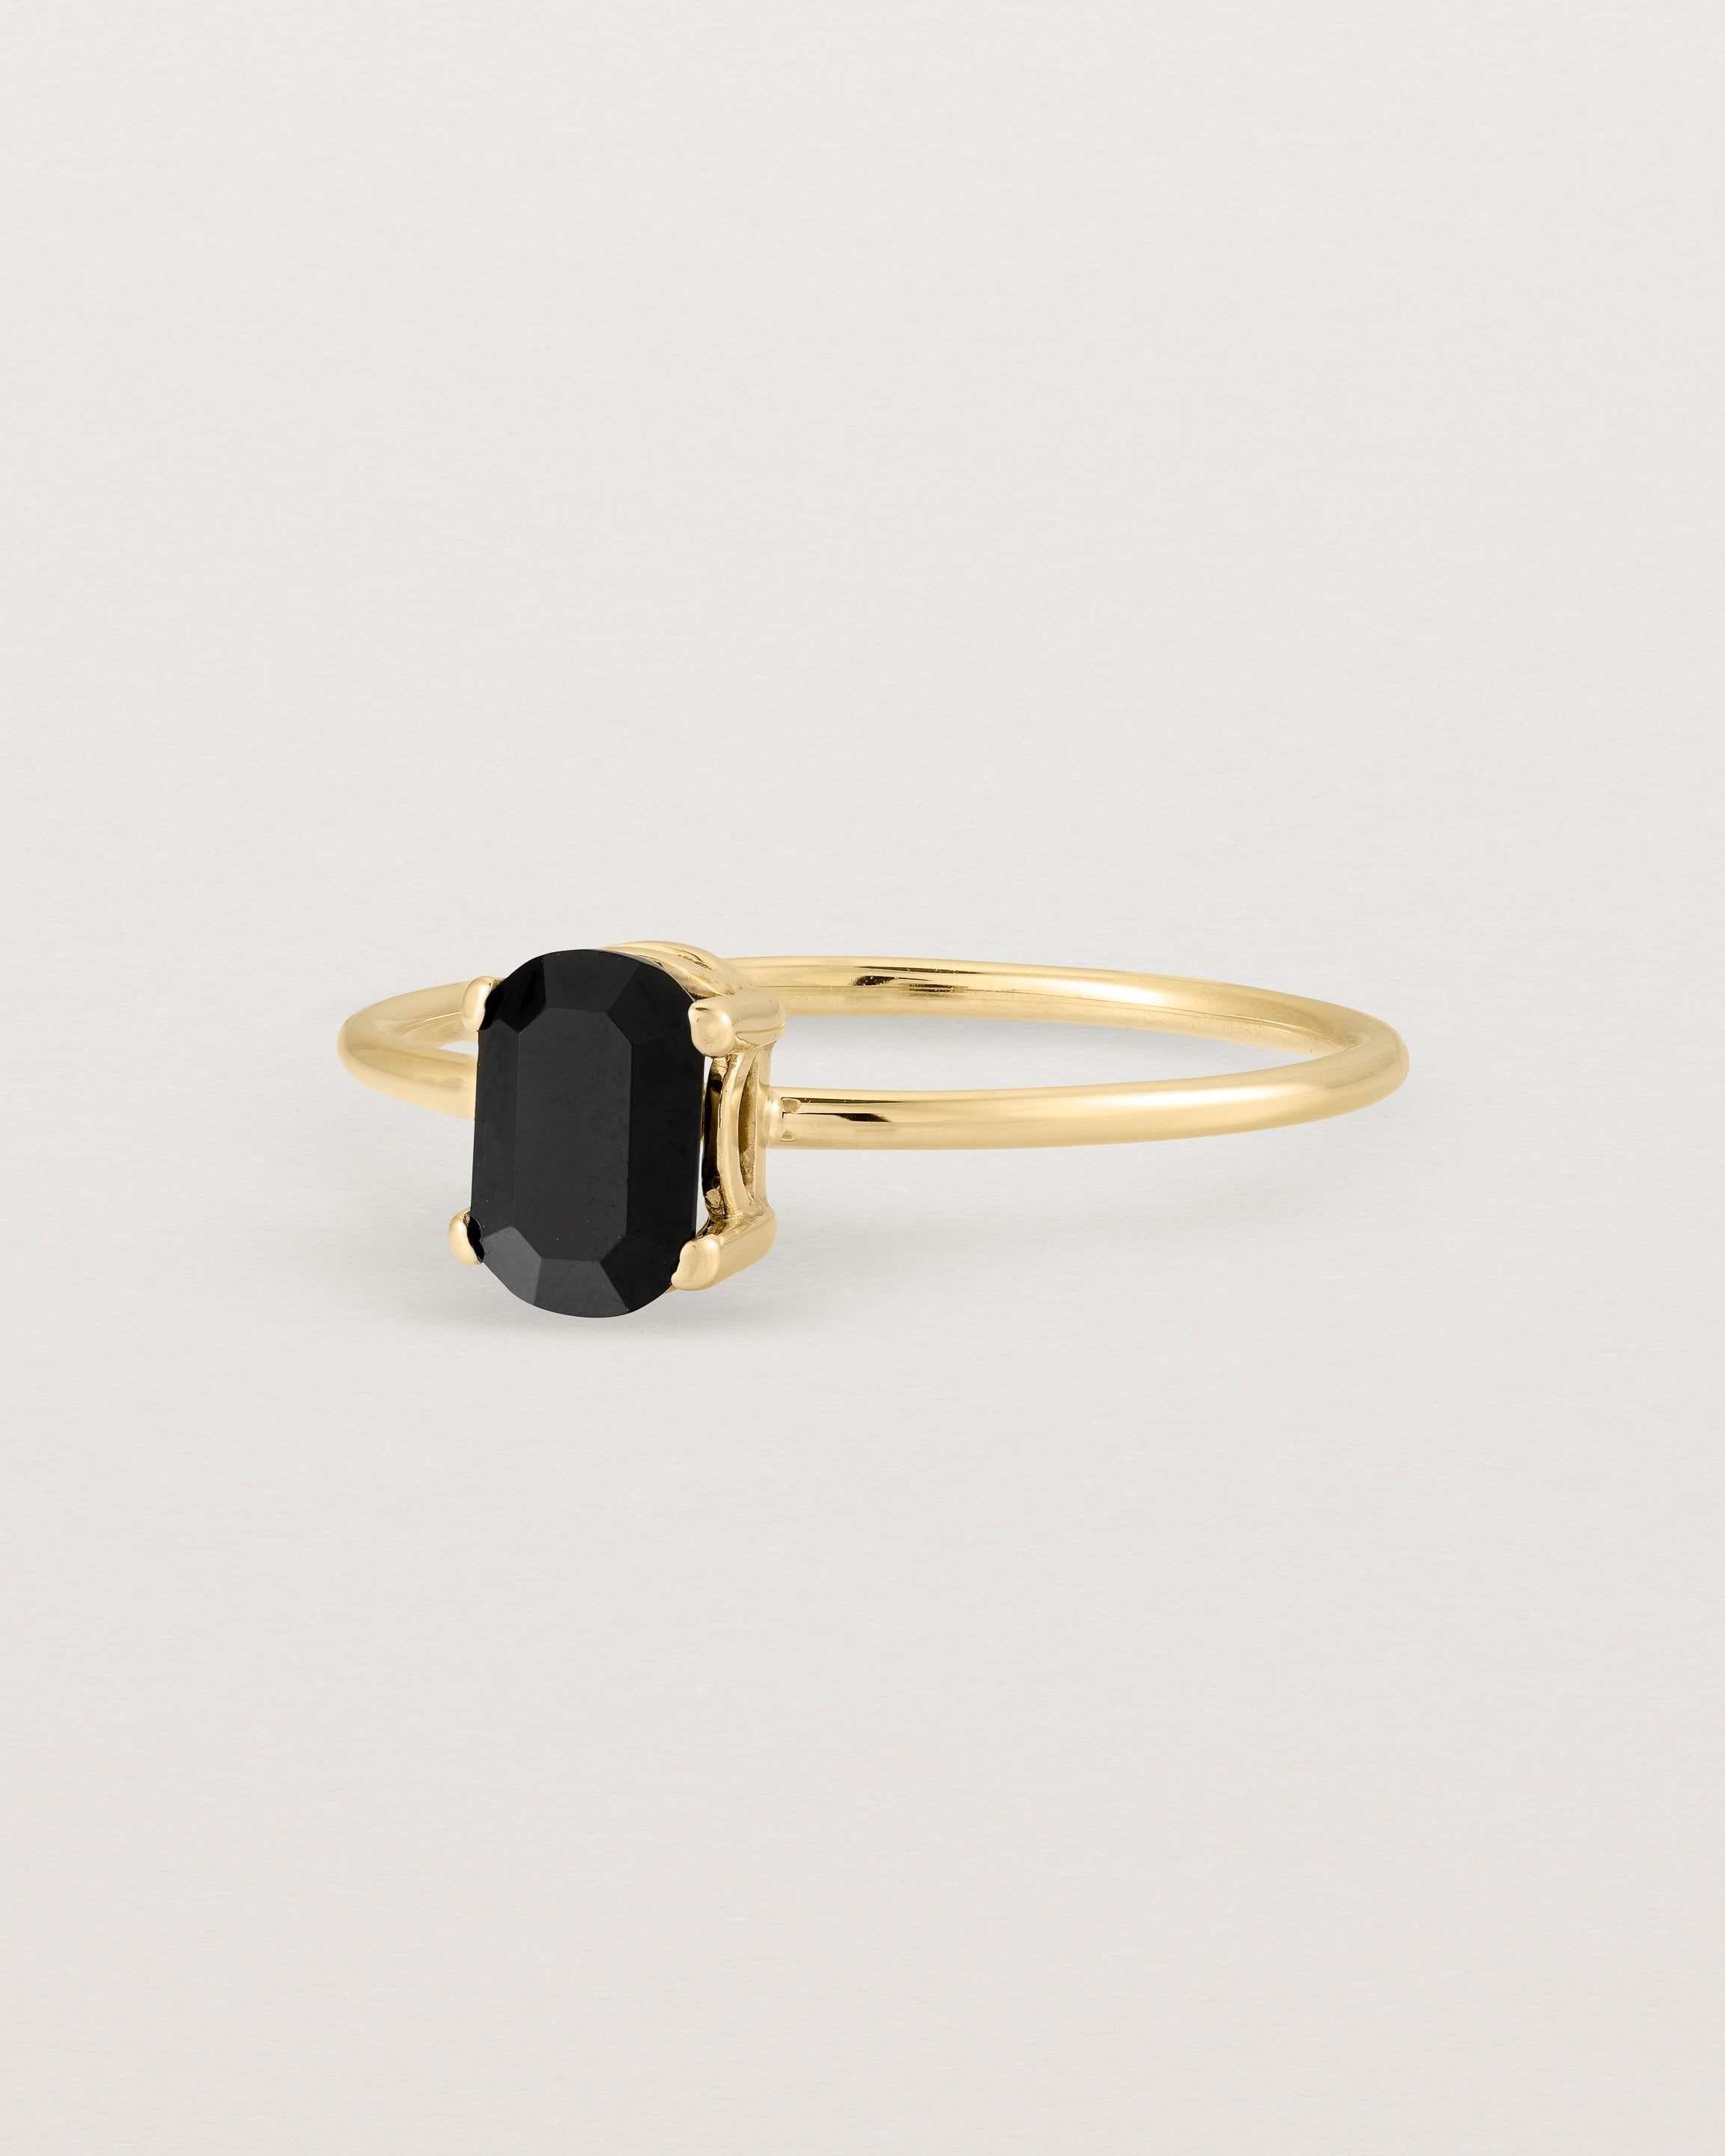 Fine yellow gold band featuring an oval black spinel stone